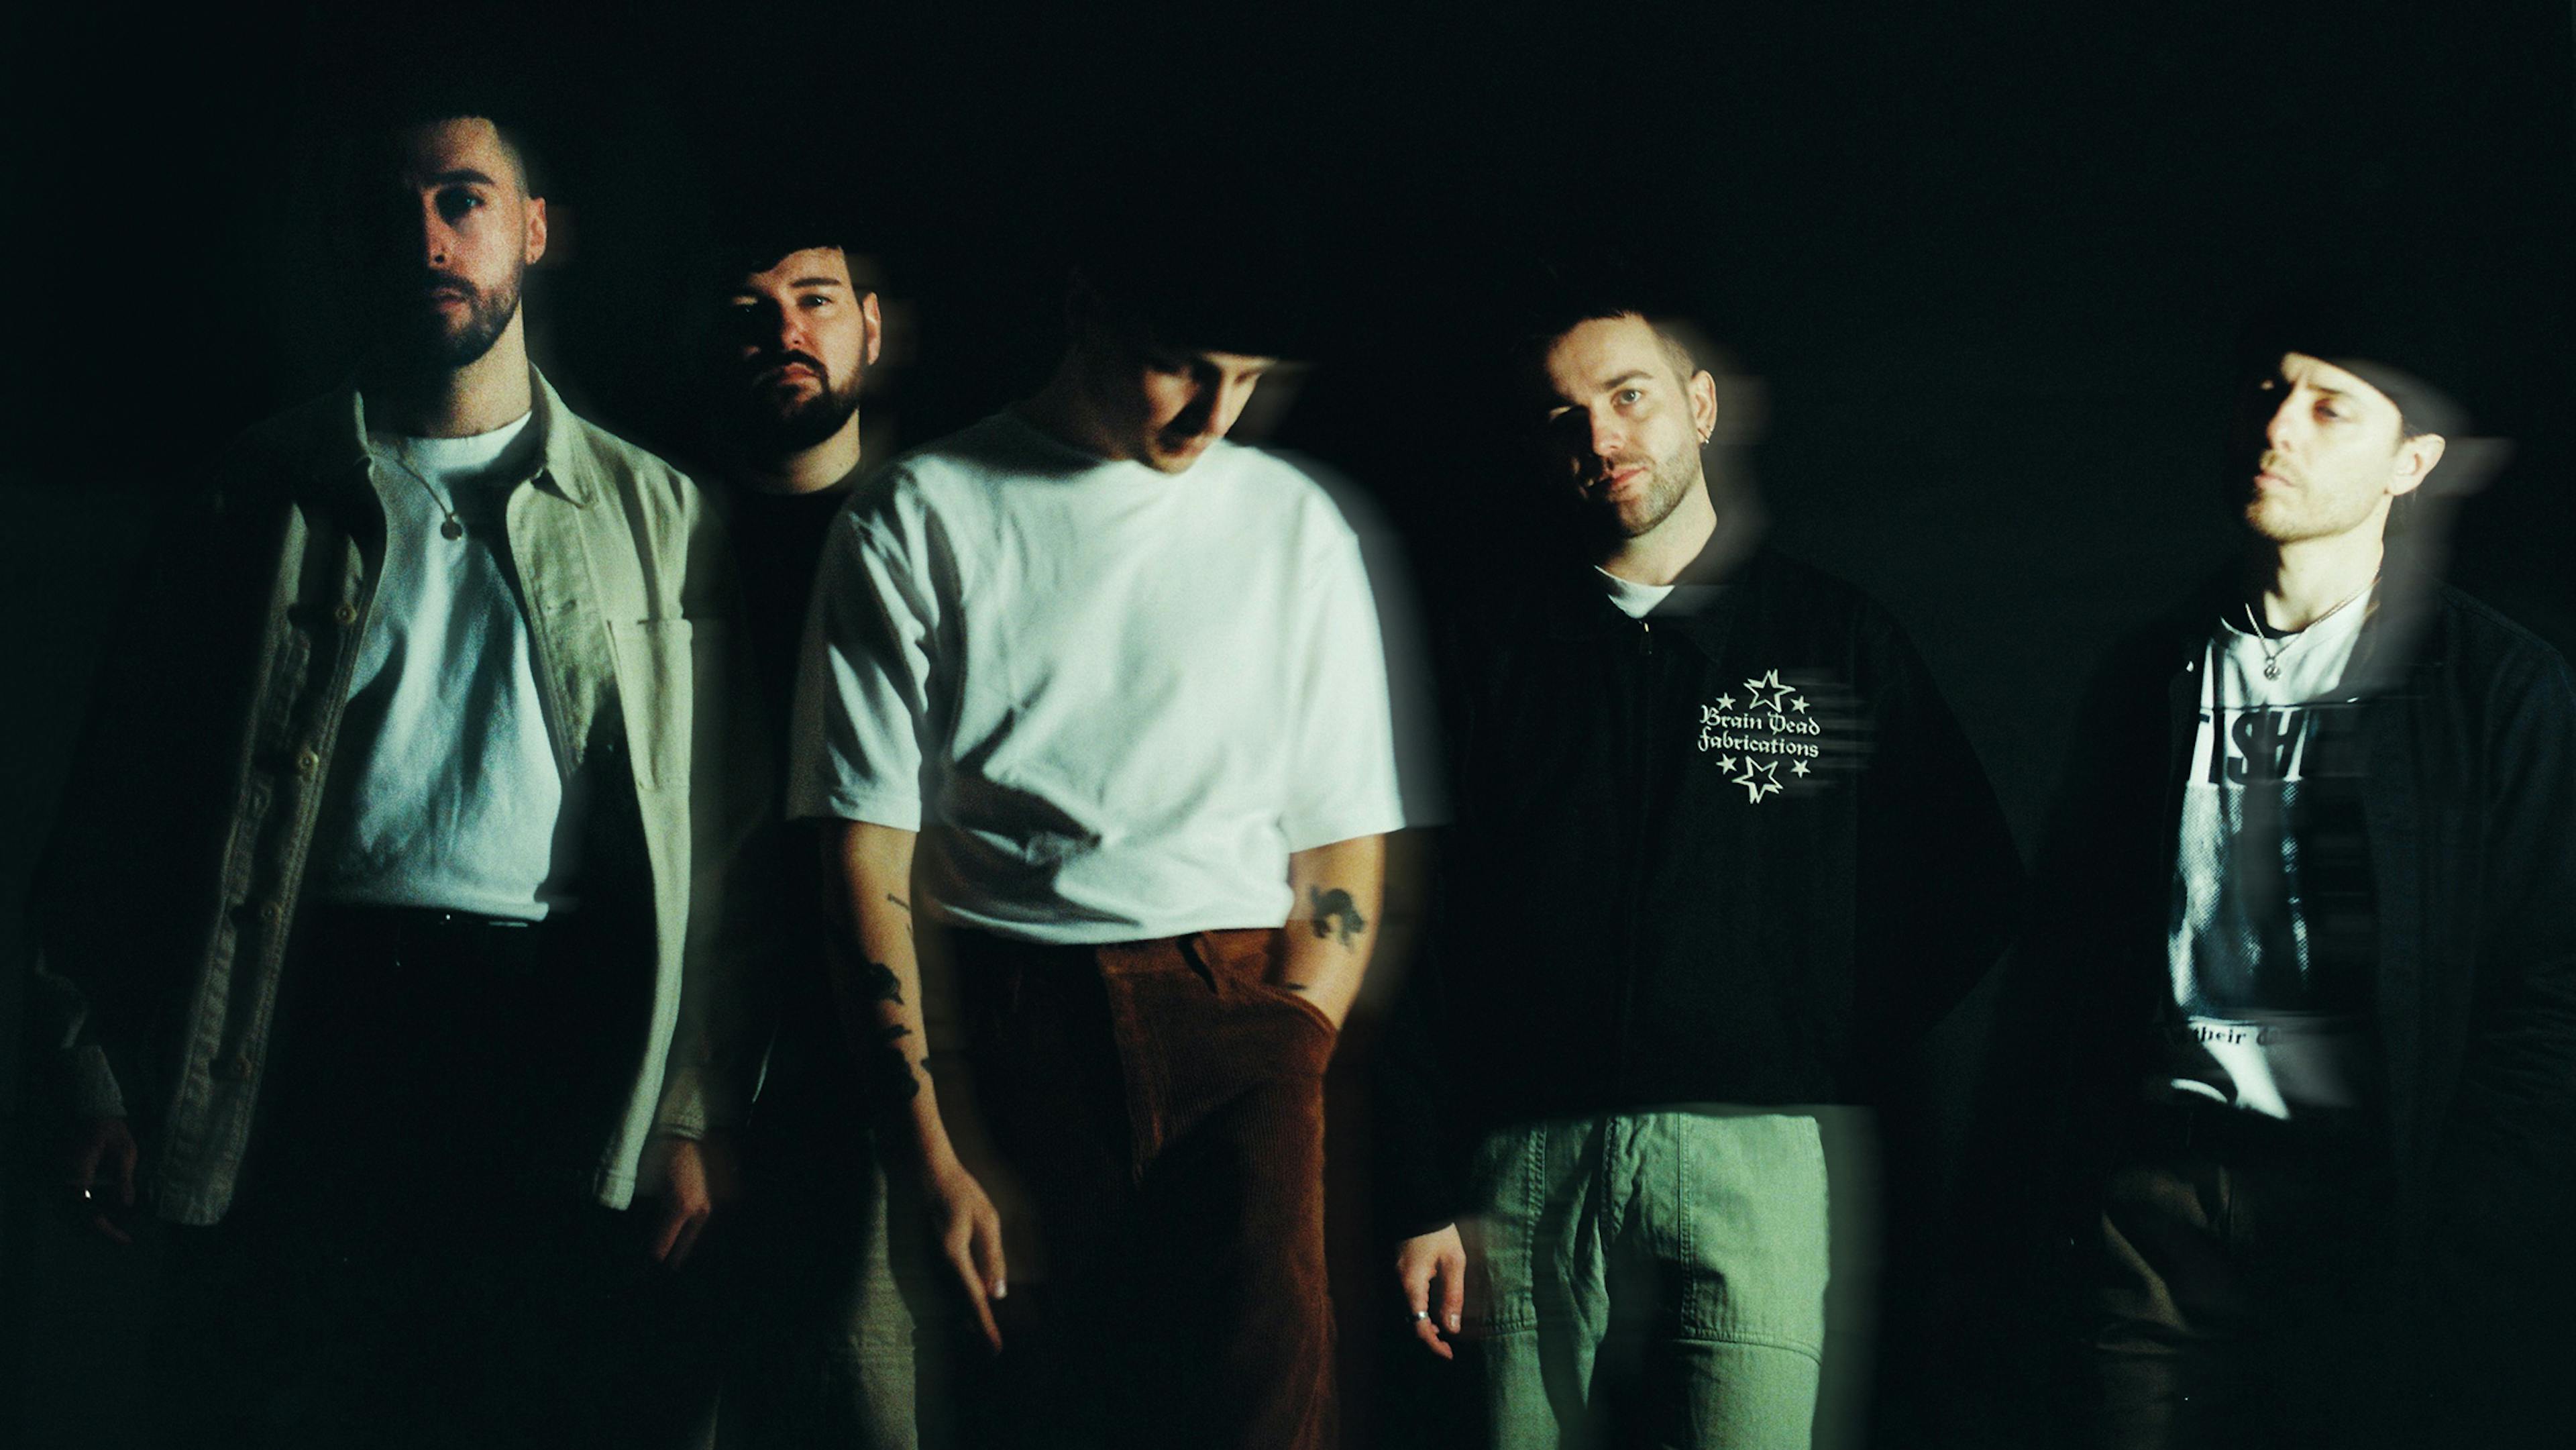 Boston Manor: “Sundiver is a journey into the blissful, glowy world we’re creating”